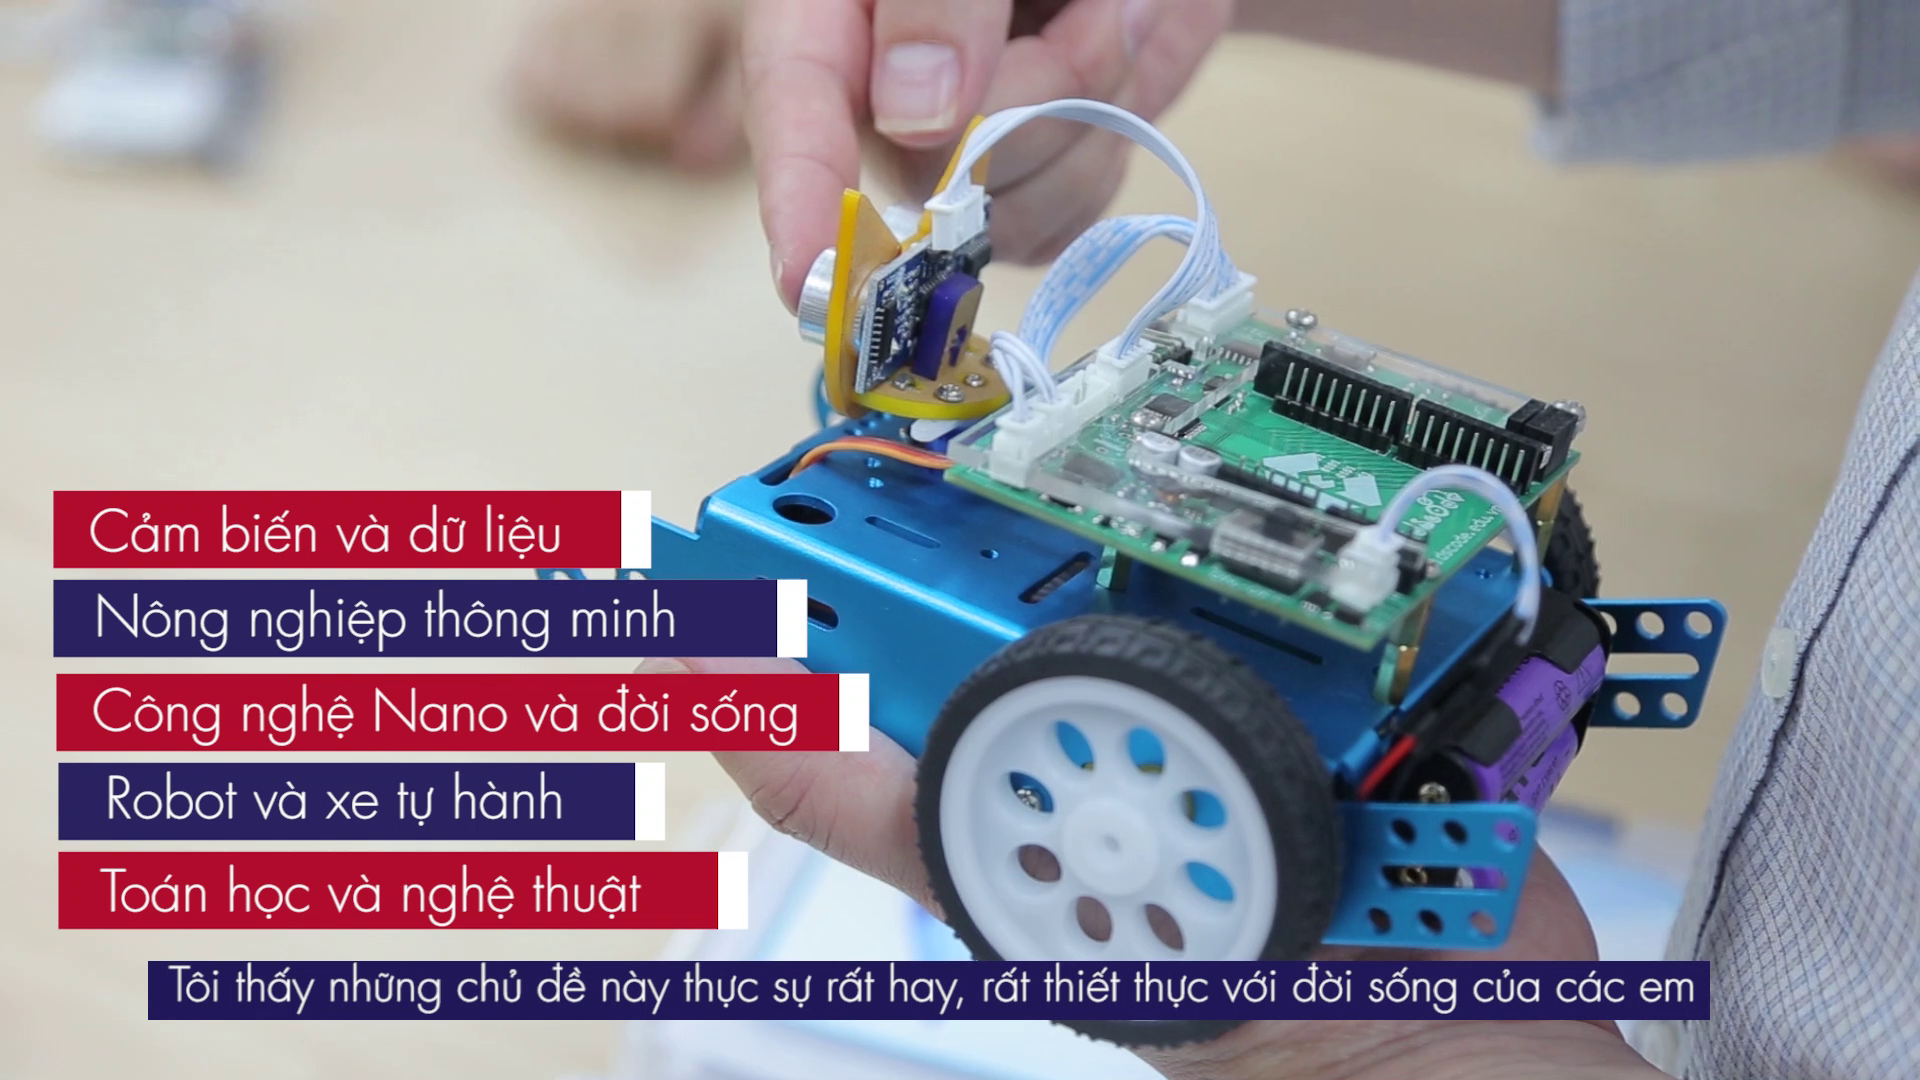 STEM CLUBs at selective high schools in Vietnam